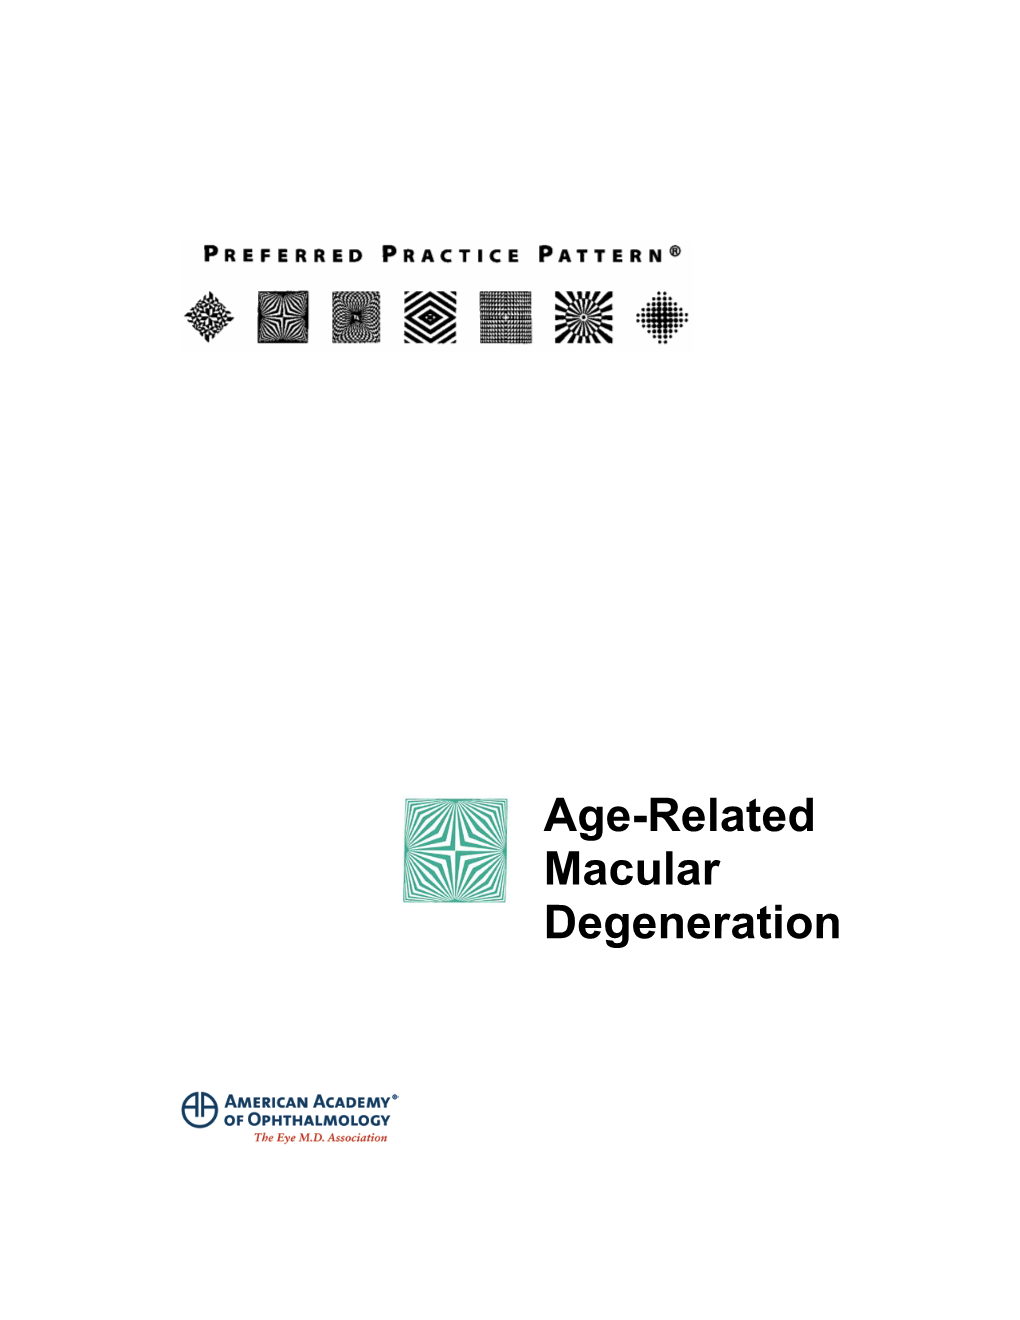 Age-Related Macular Degeneration PPP